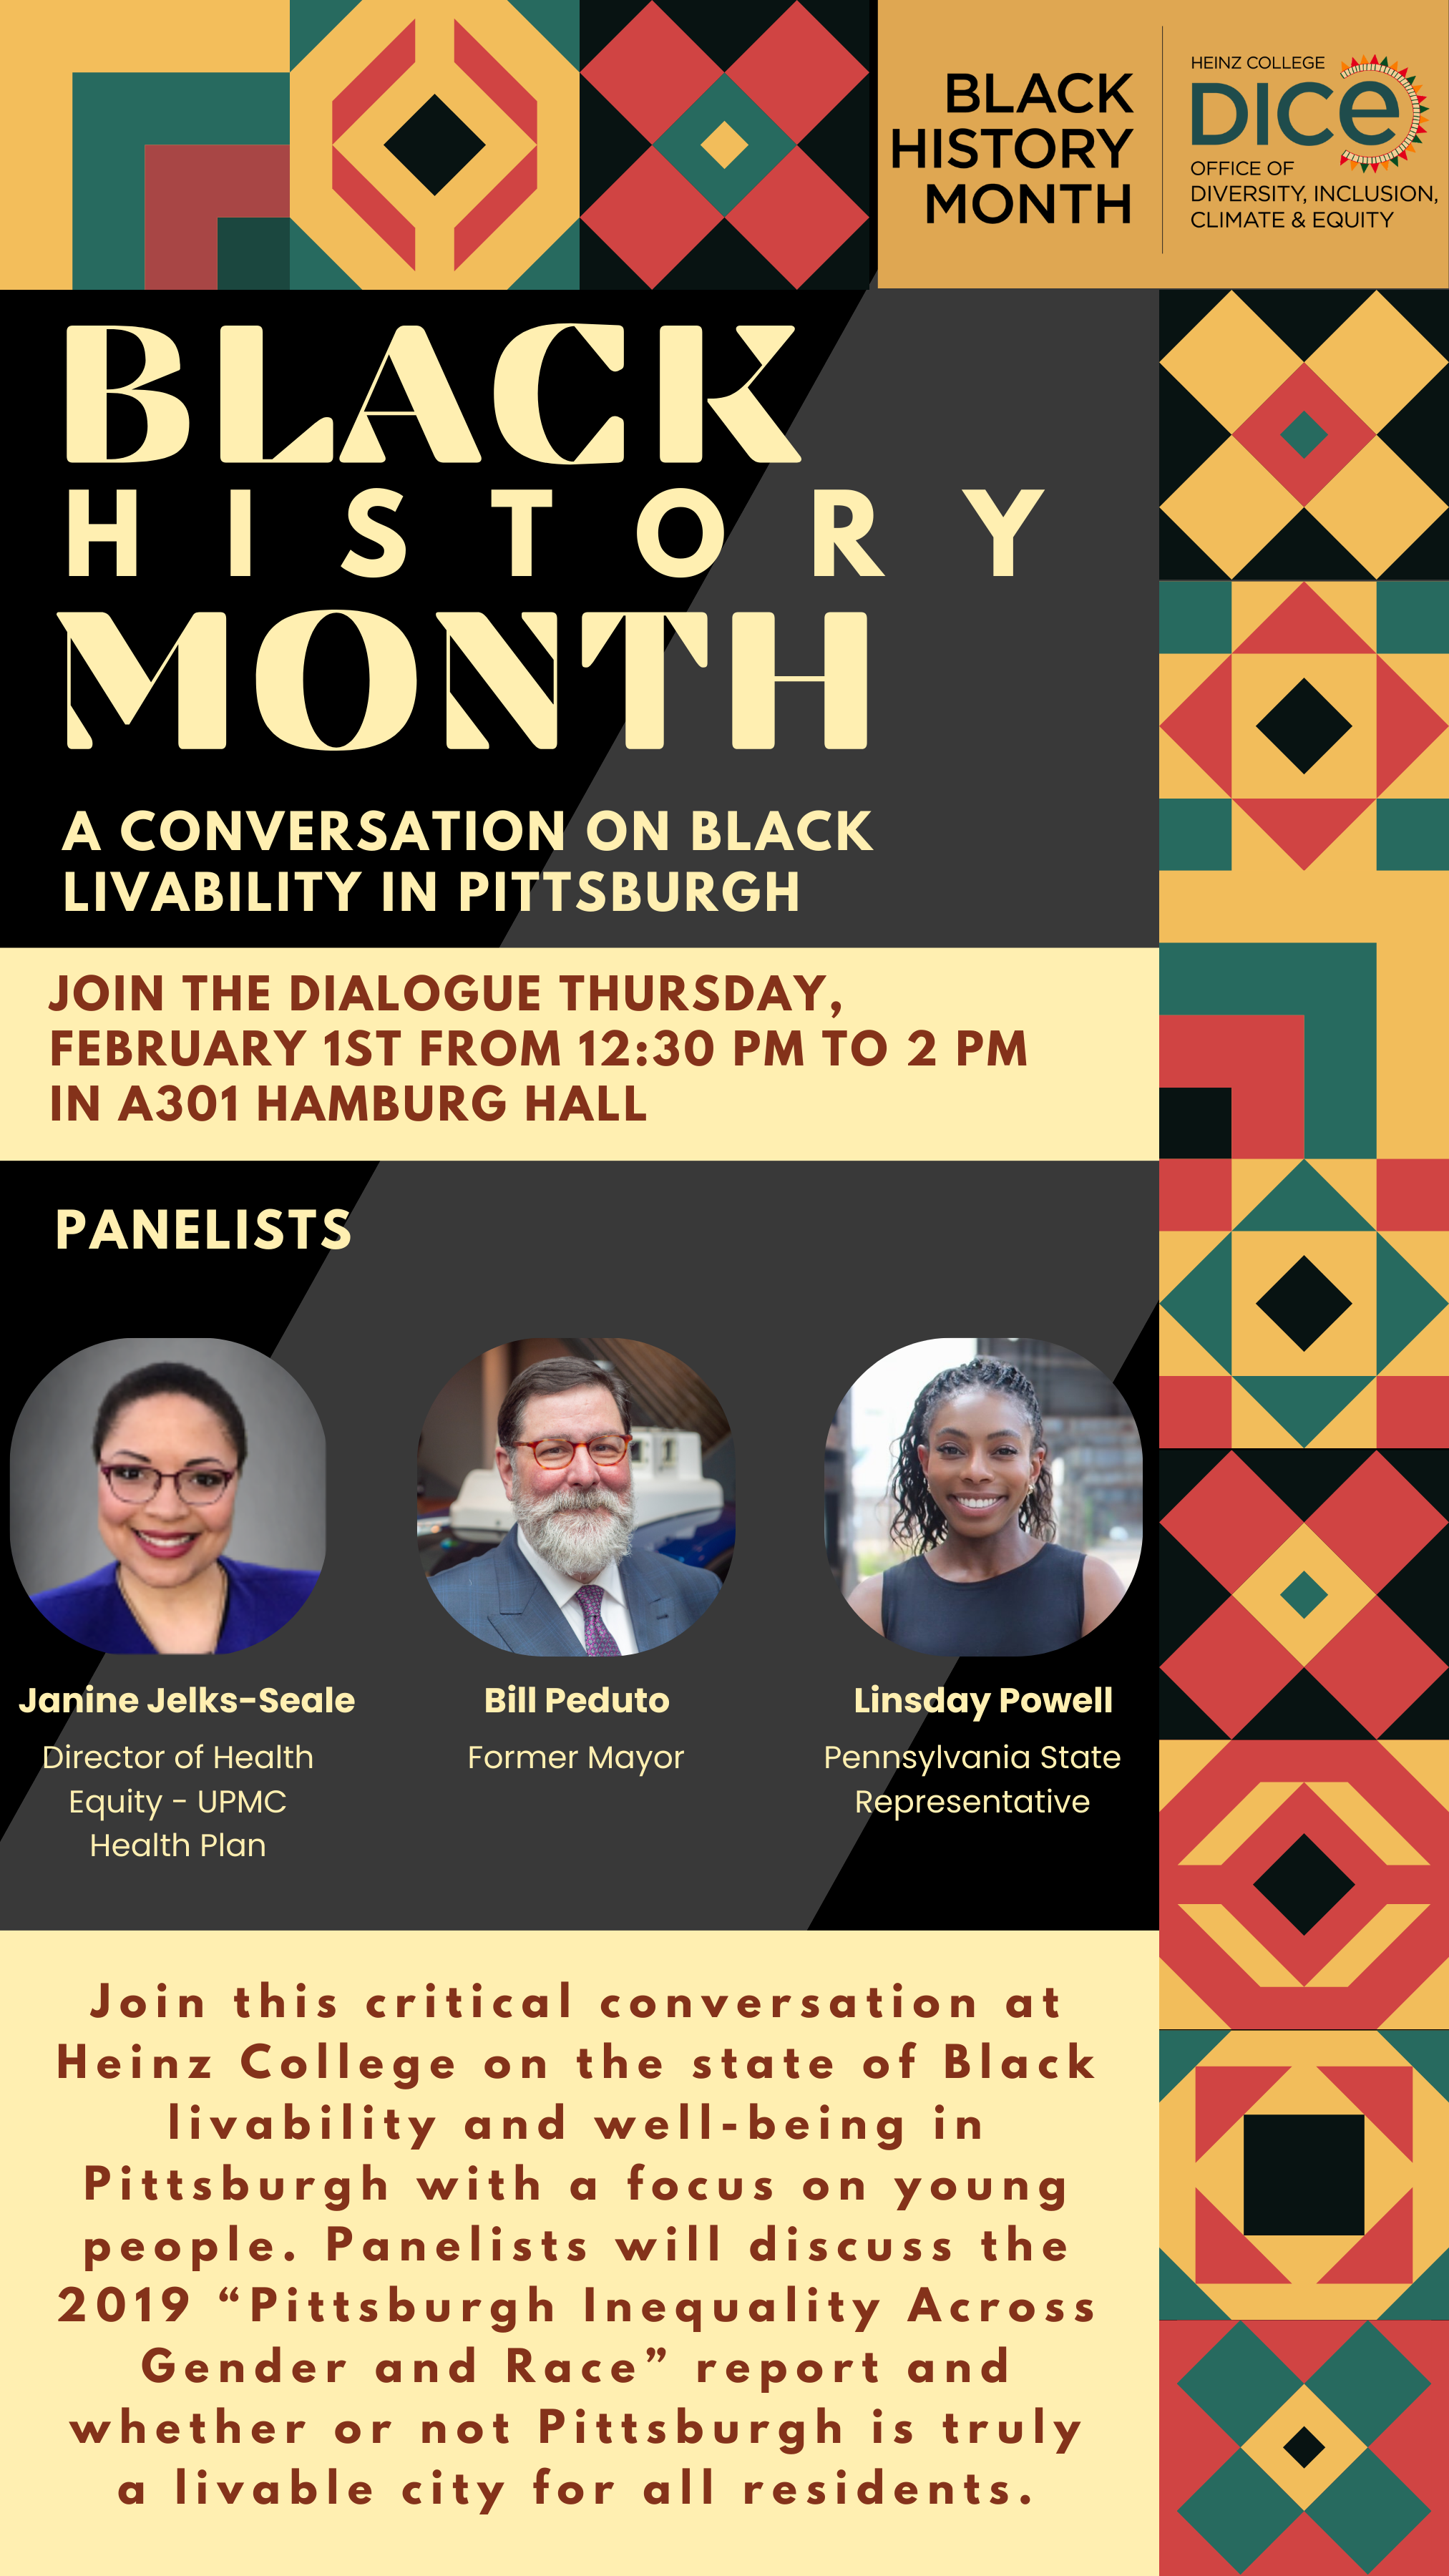 bhm-panel-discussion.png